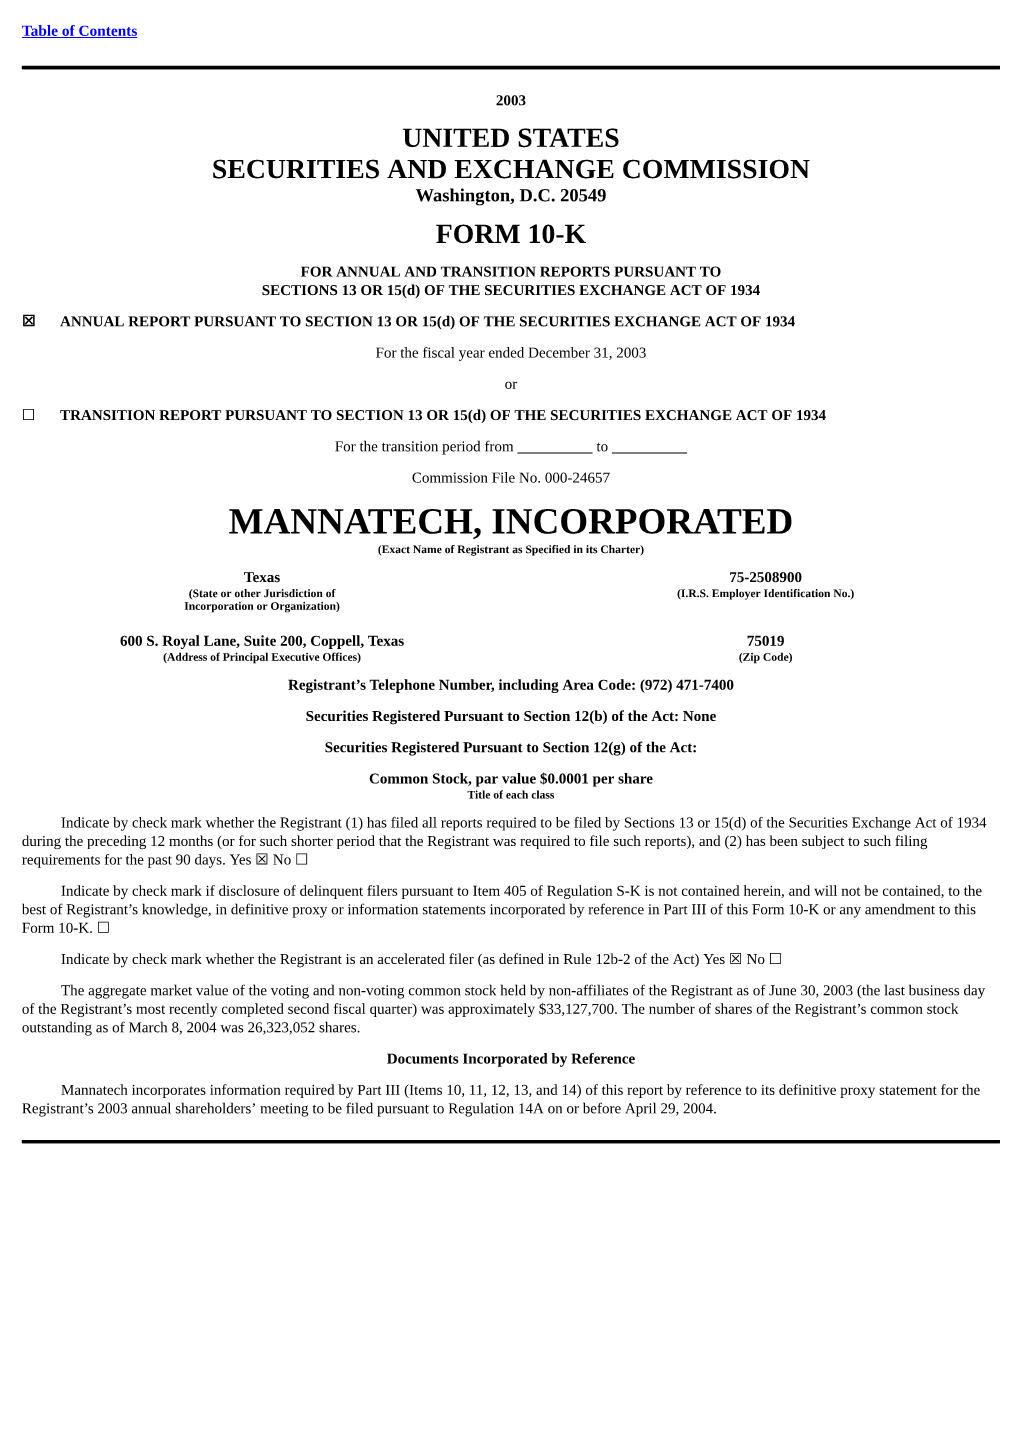 MANNATECH, INCORPORATED (Exact Name of Registrant As Specified in Its Charter)